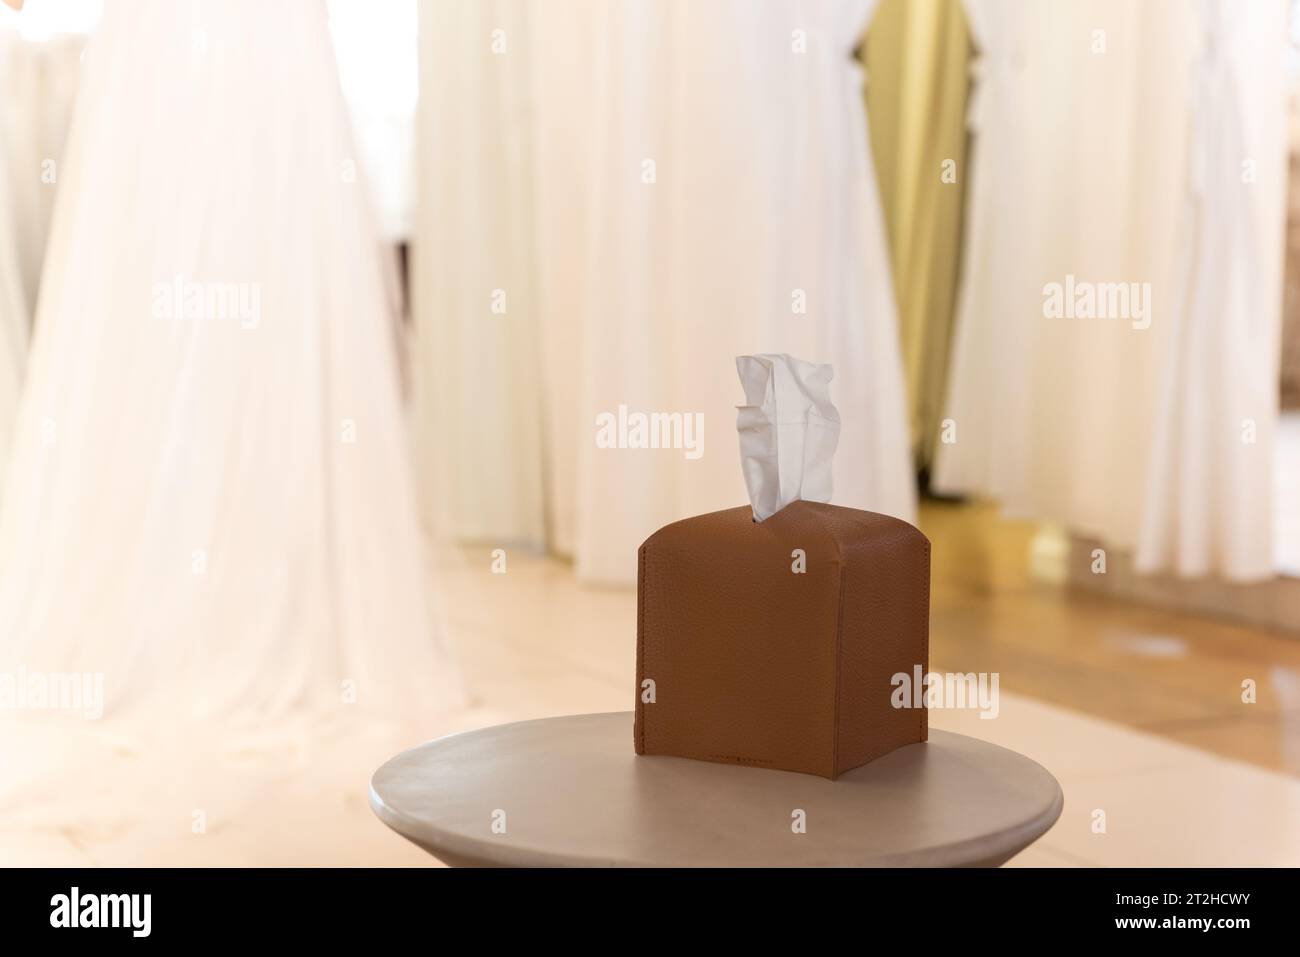 Wedding dress boutique store is fully prepared for all the emotions with a full box of tissues. Stock Photo